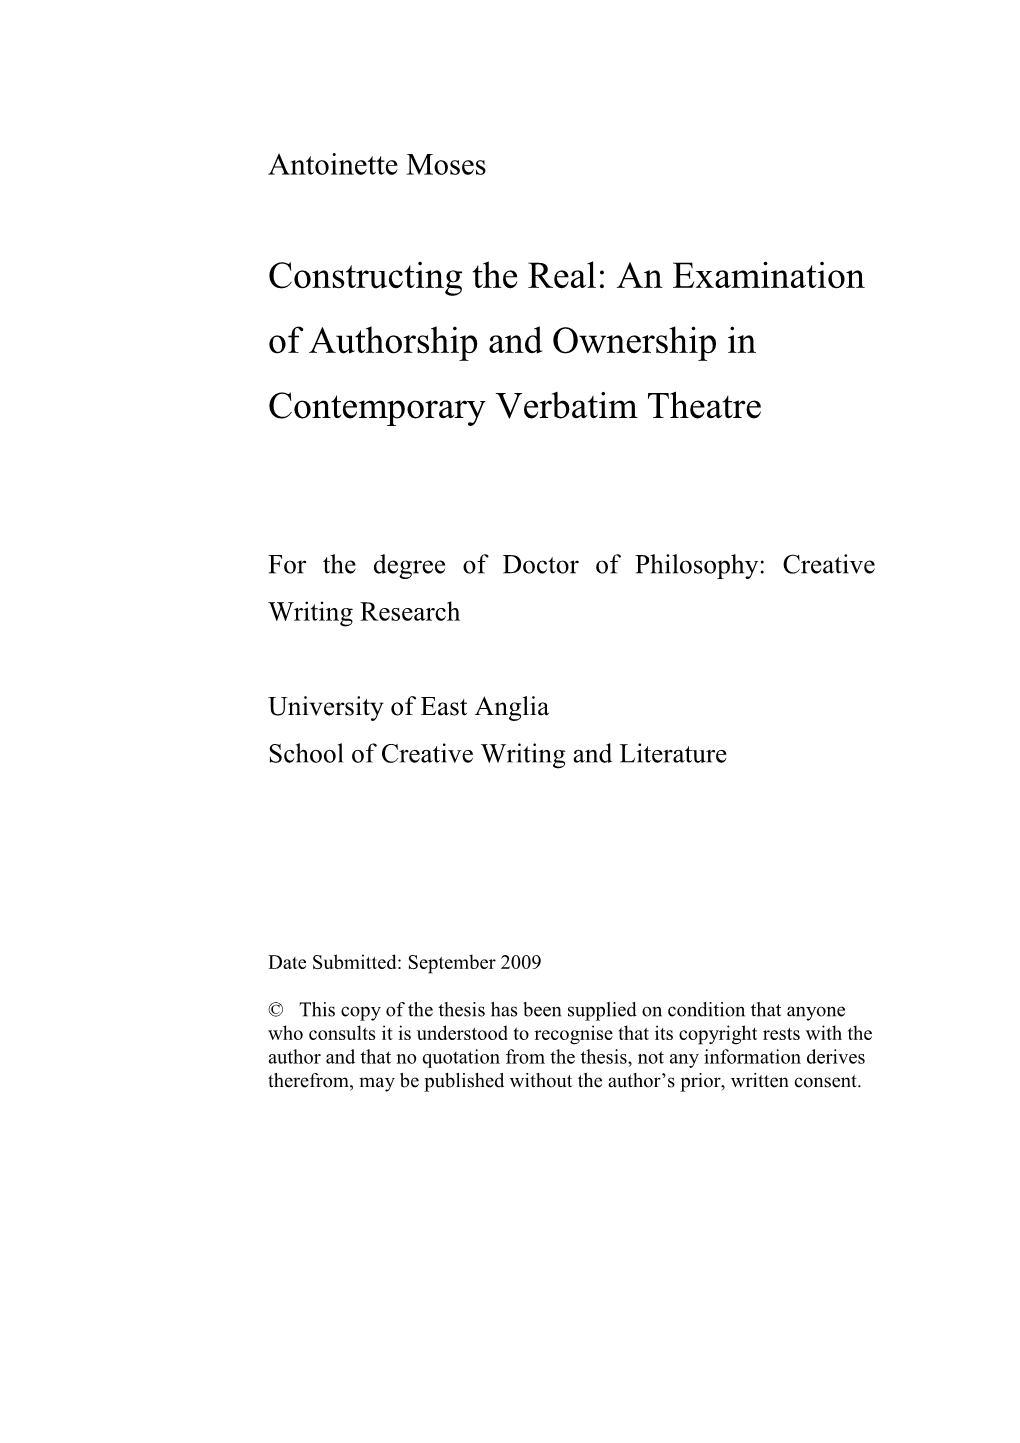 An Examination of Authorship and Ownership in Contemporary Verbatim Theatre